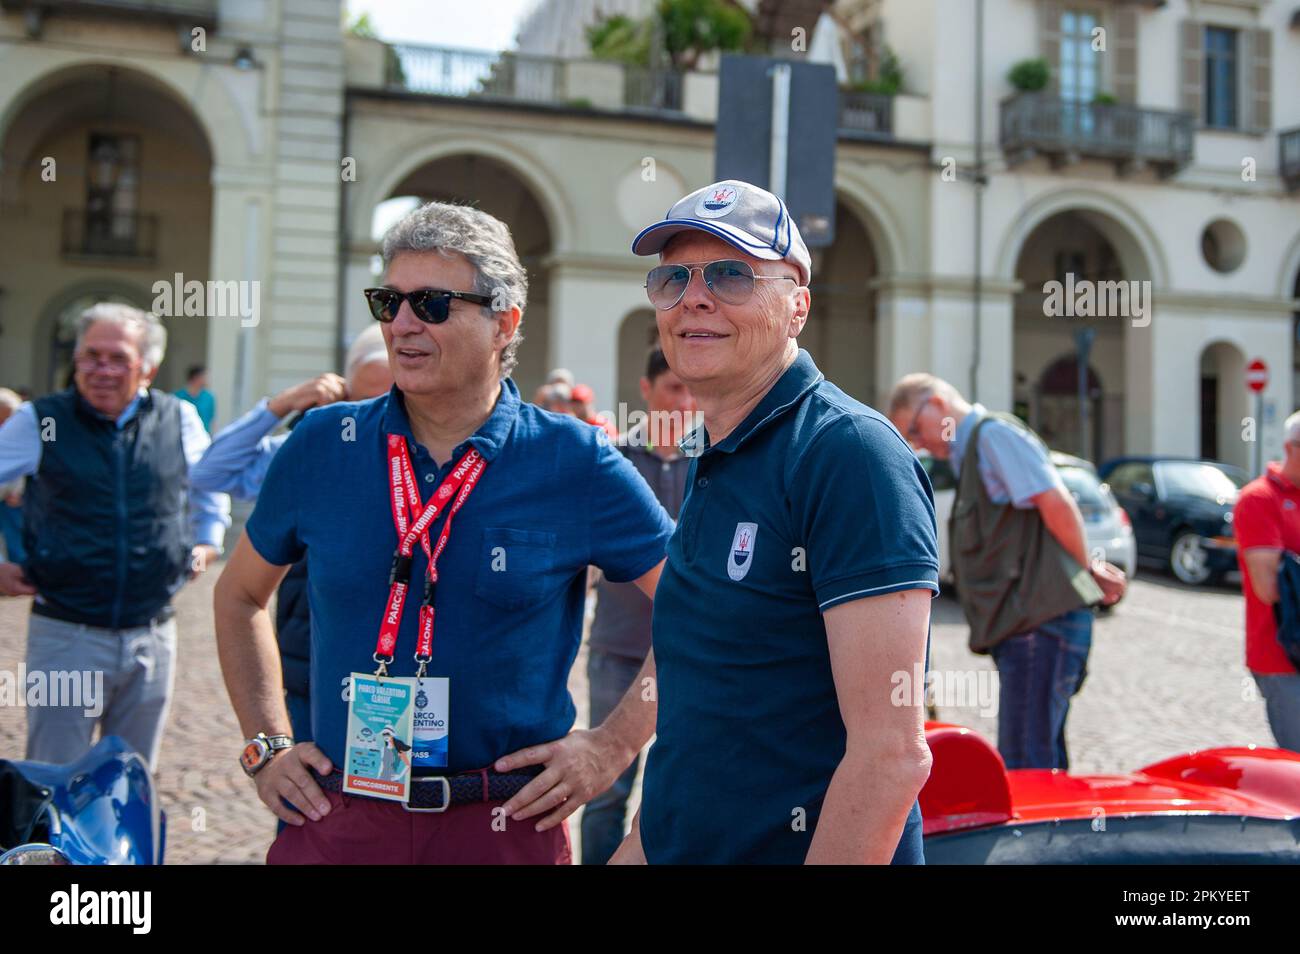 06/22/2019 Turin (Italy) Fabrizio Giugiaro and Alfredo Stola in Turin, during a break in a concours d'elegance for vintage cars Stock Photo